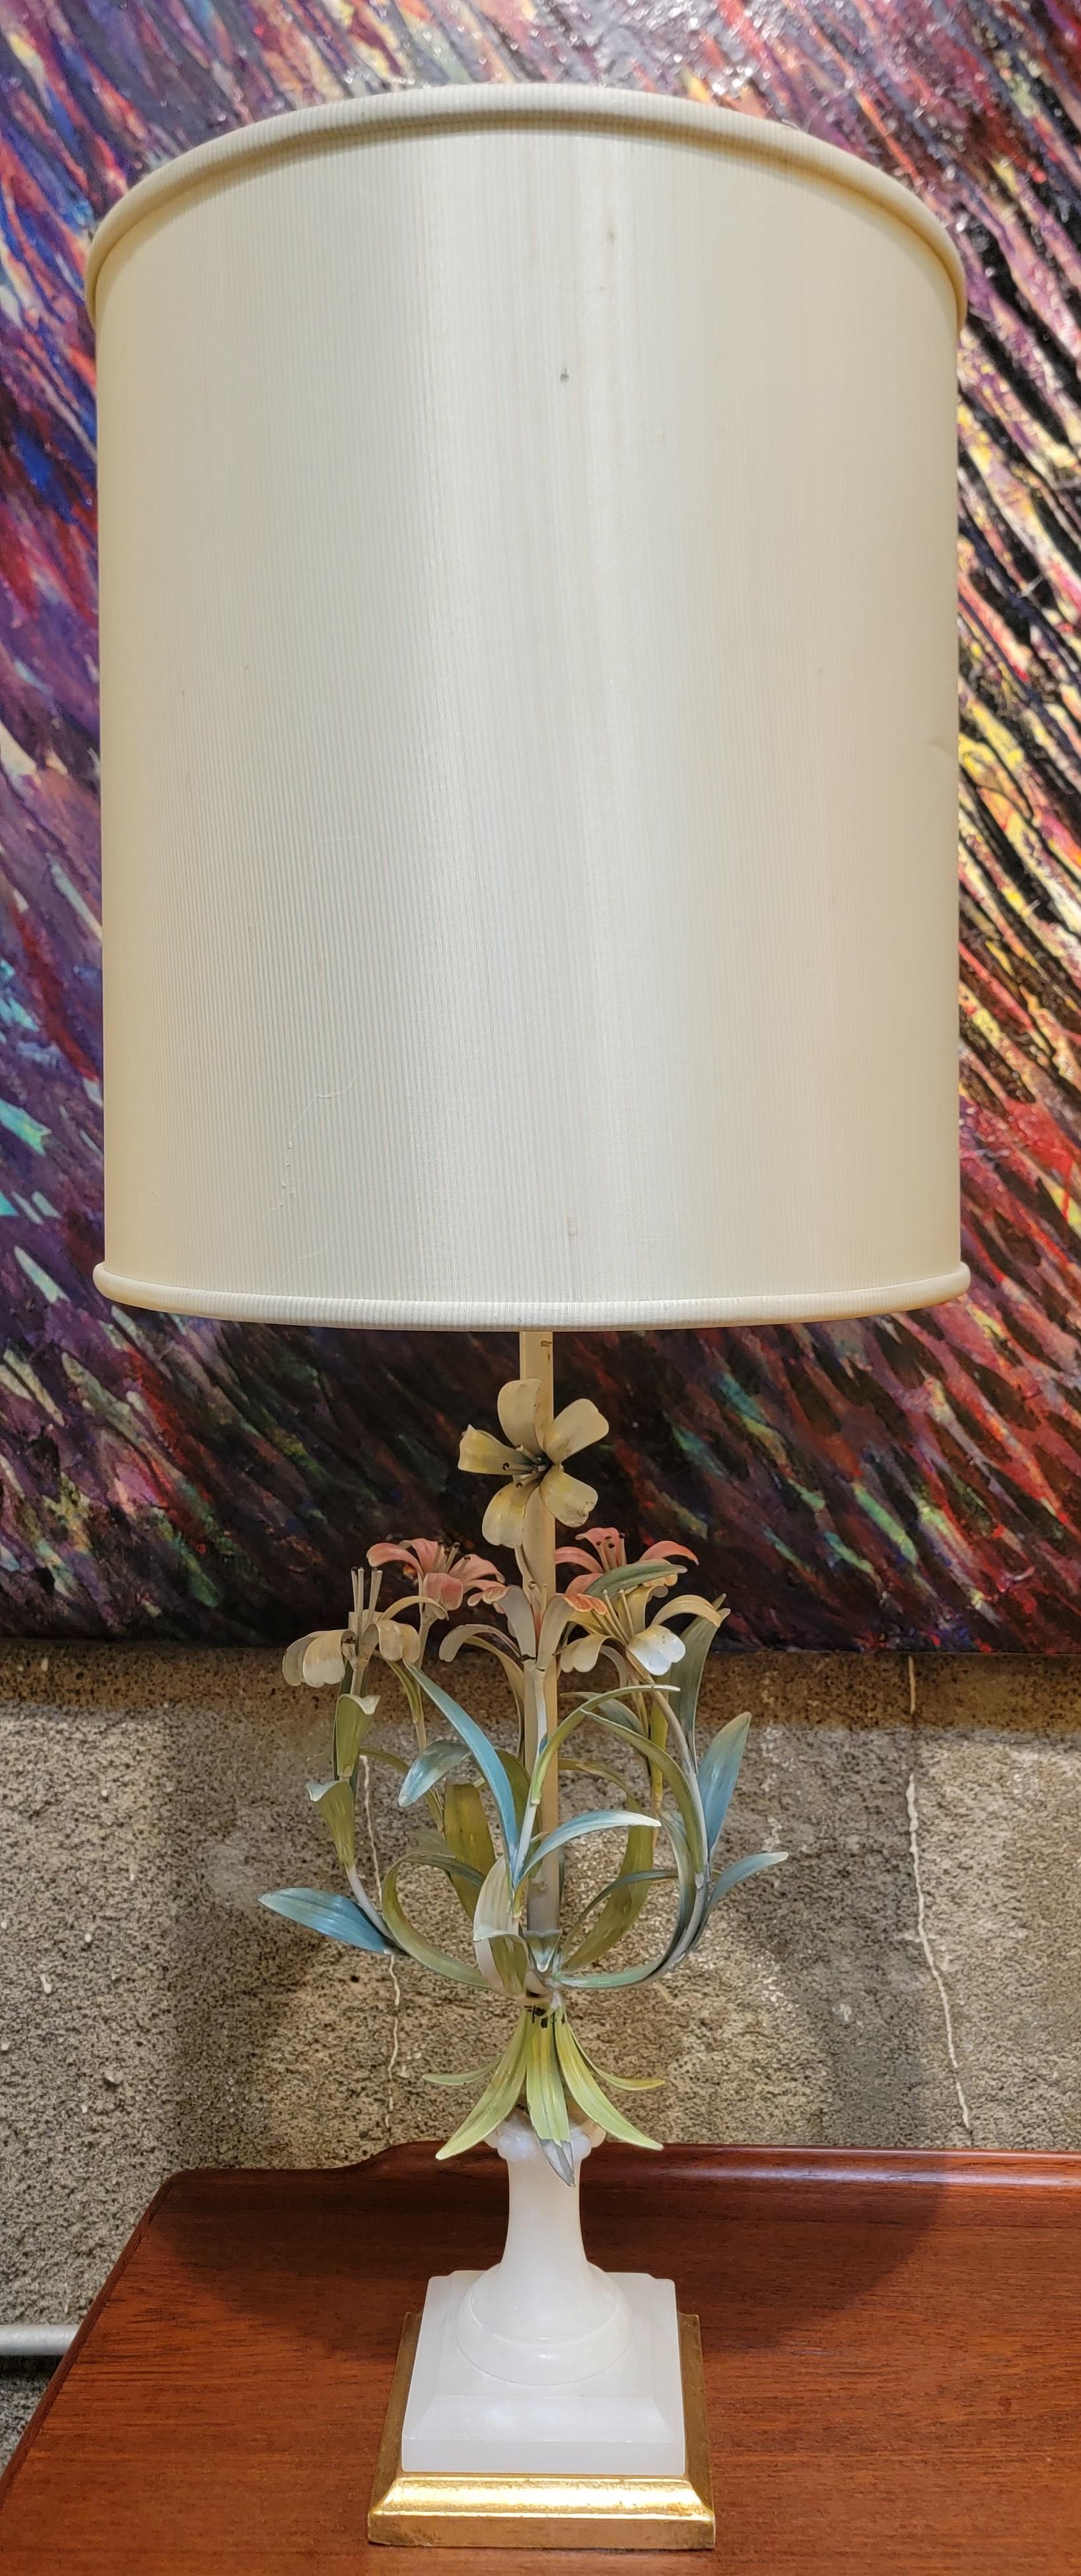 Safran & Gluckman Import Italian tole painted floral and alabaster table lamp. Base measures 5.38 inches square. Metal floral measures 8.5 inches diameter.